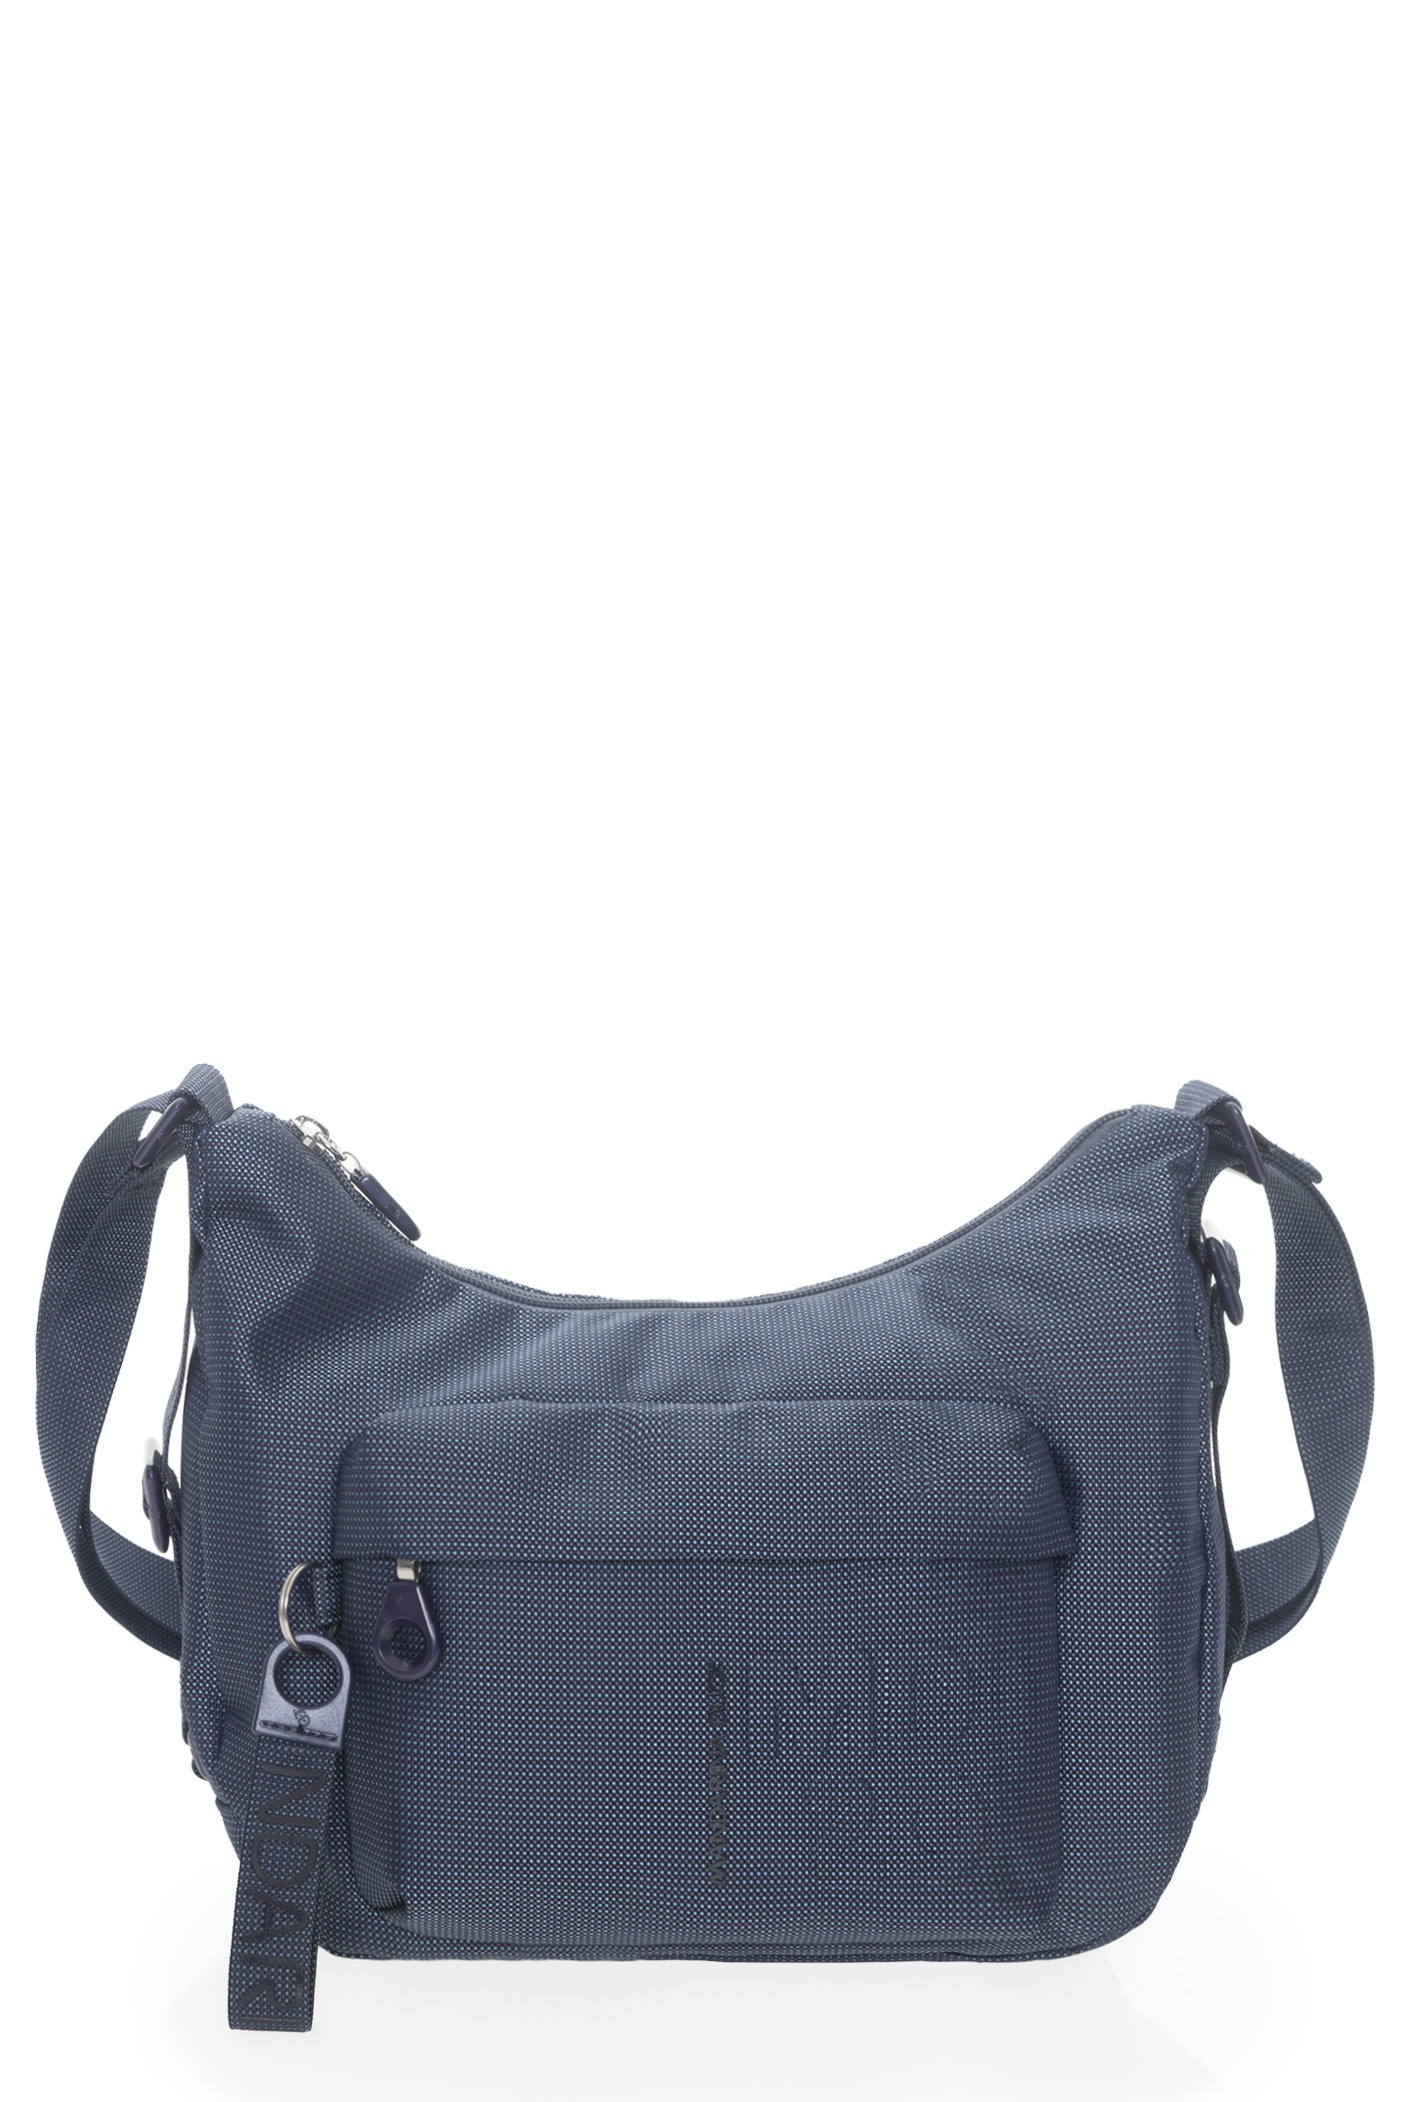 (image for) Borsa a tracolla F0816222-0384 mandarina duck outlet online